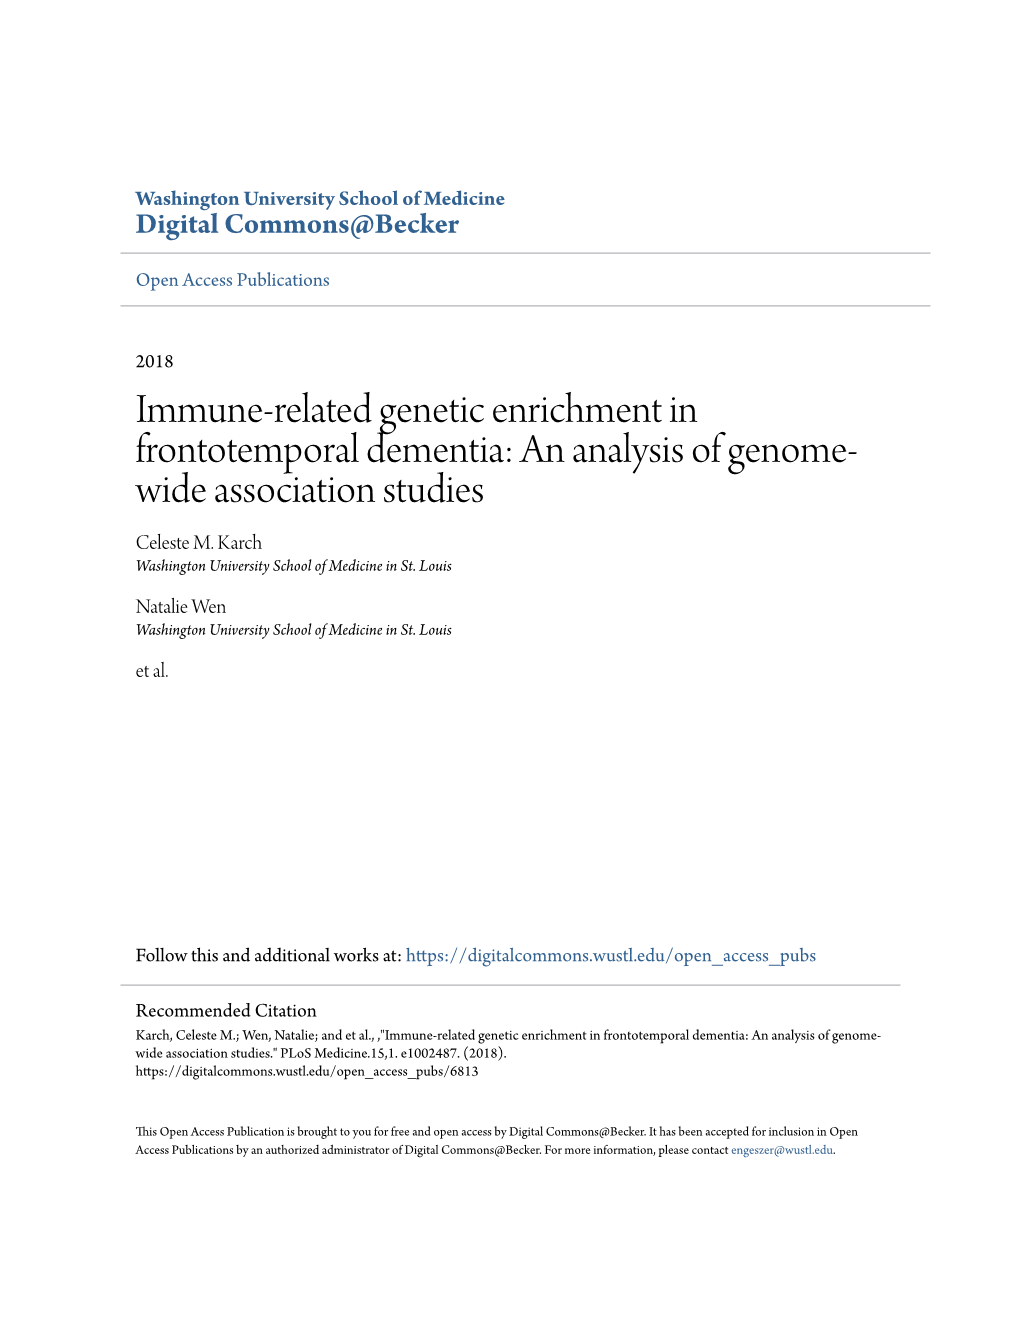 An Analysis of Genome-Wide Association Studies